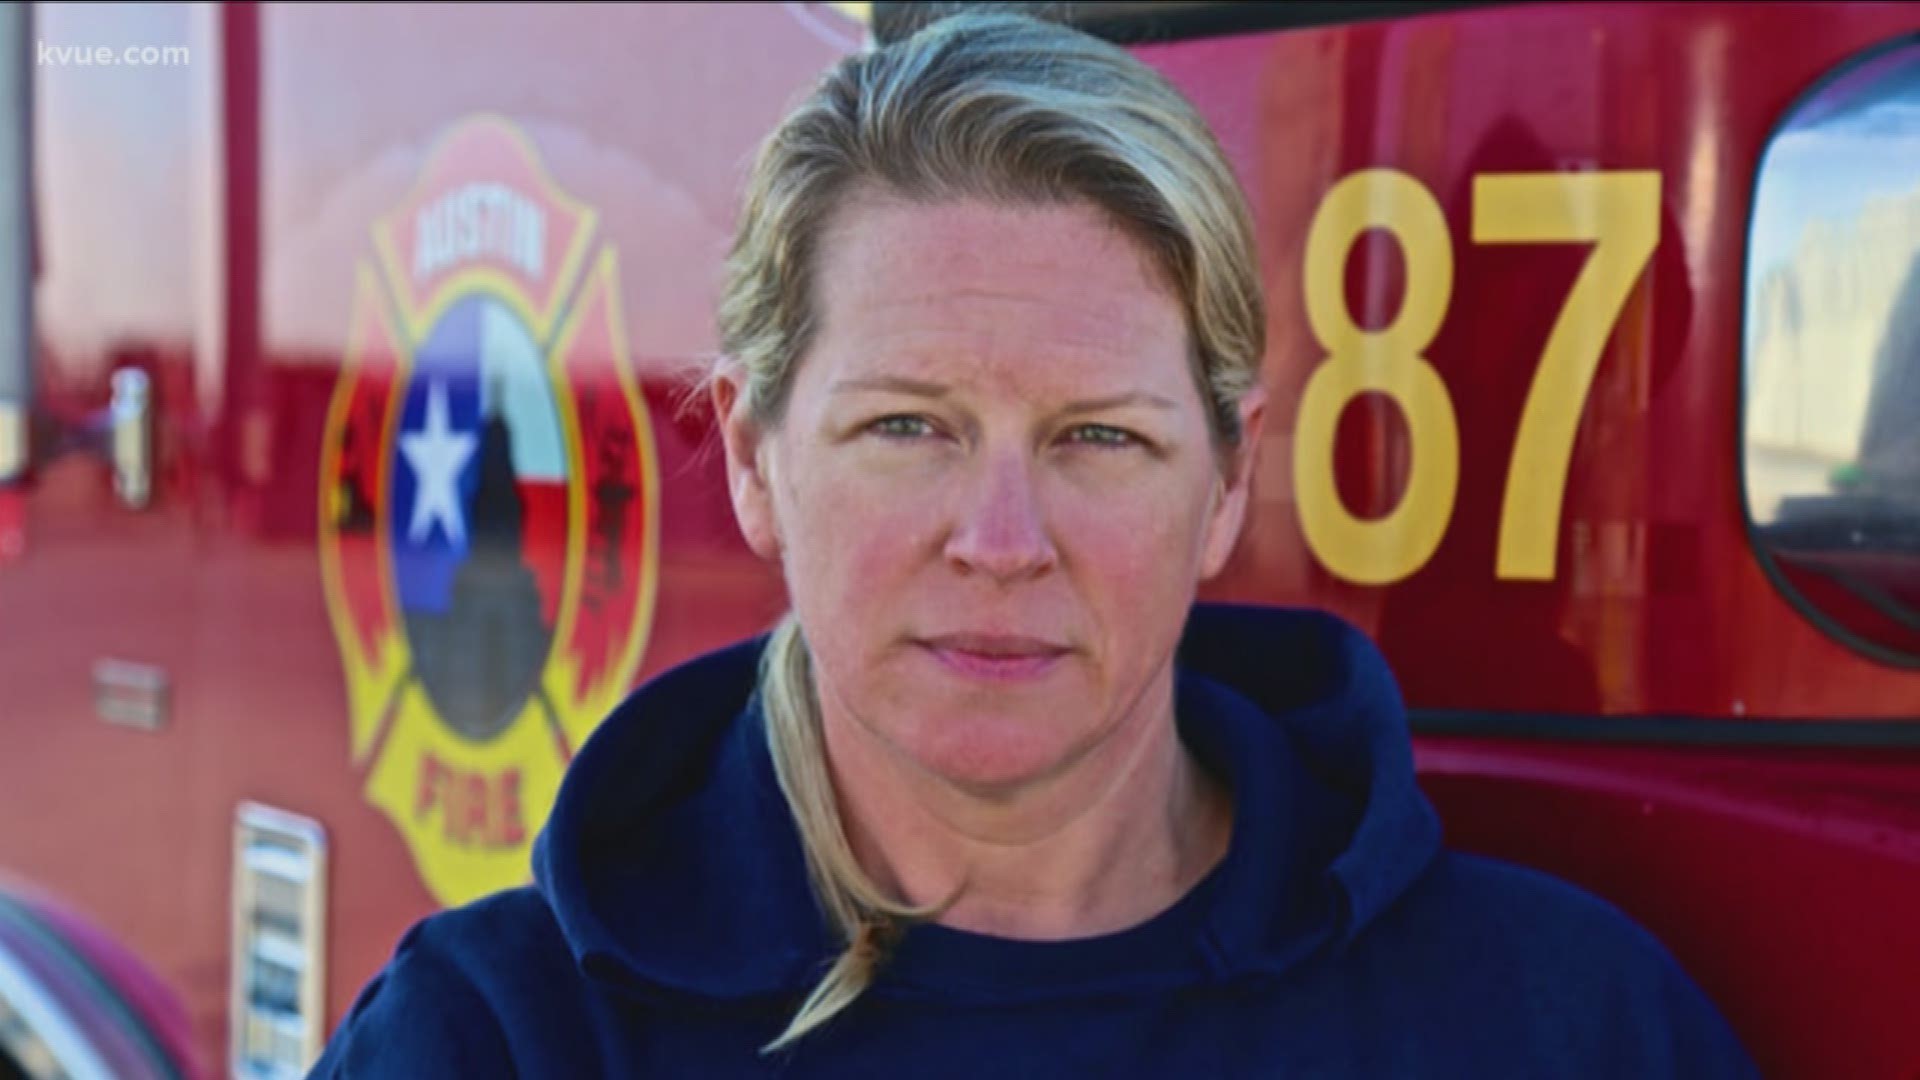 An Austin firefighter, who was allegedly recorded while she showered at work, is coming forward for the first time.